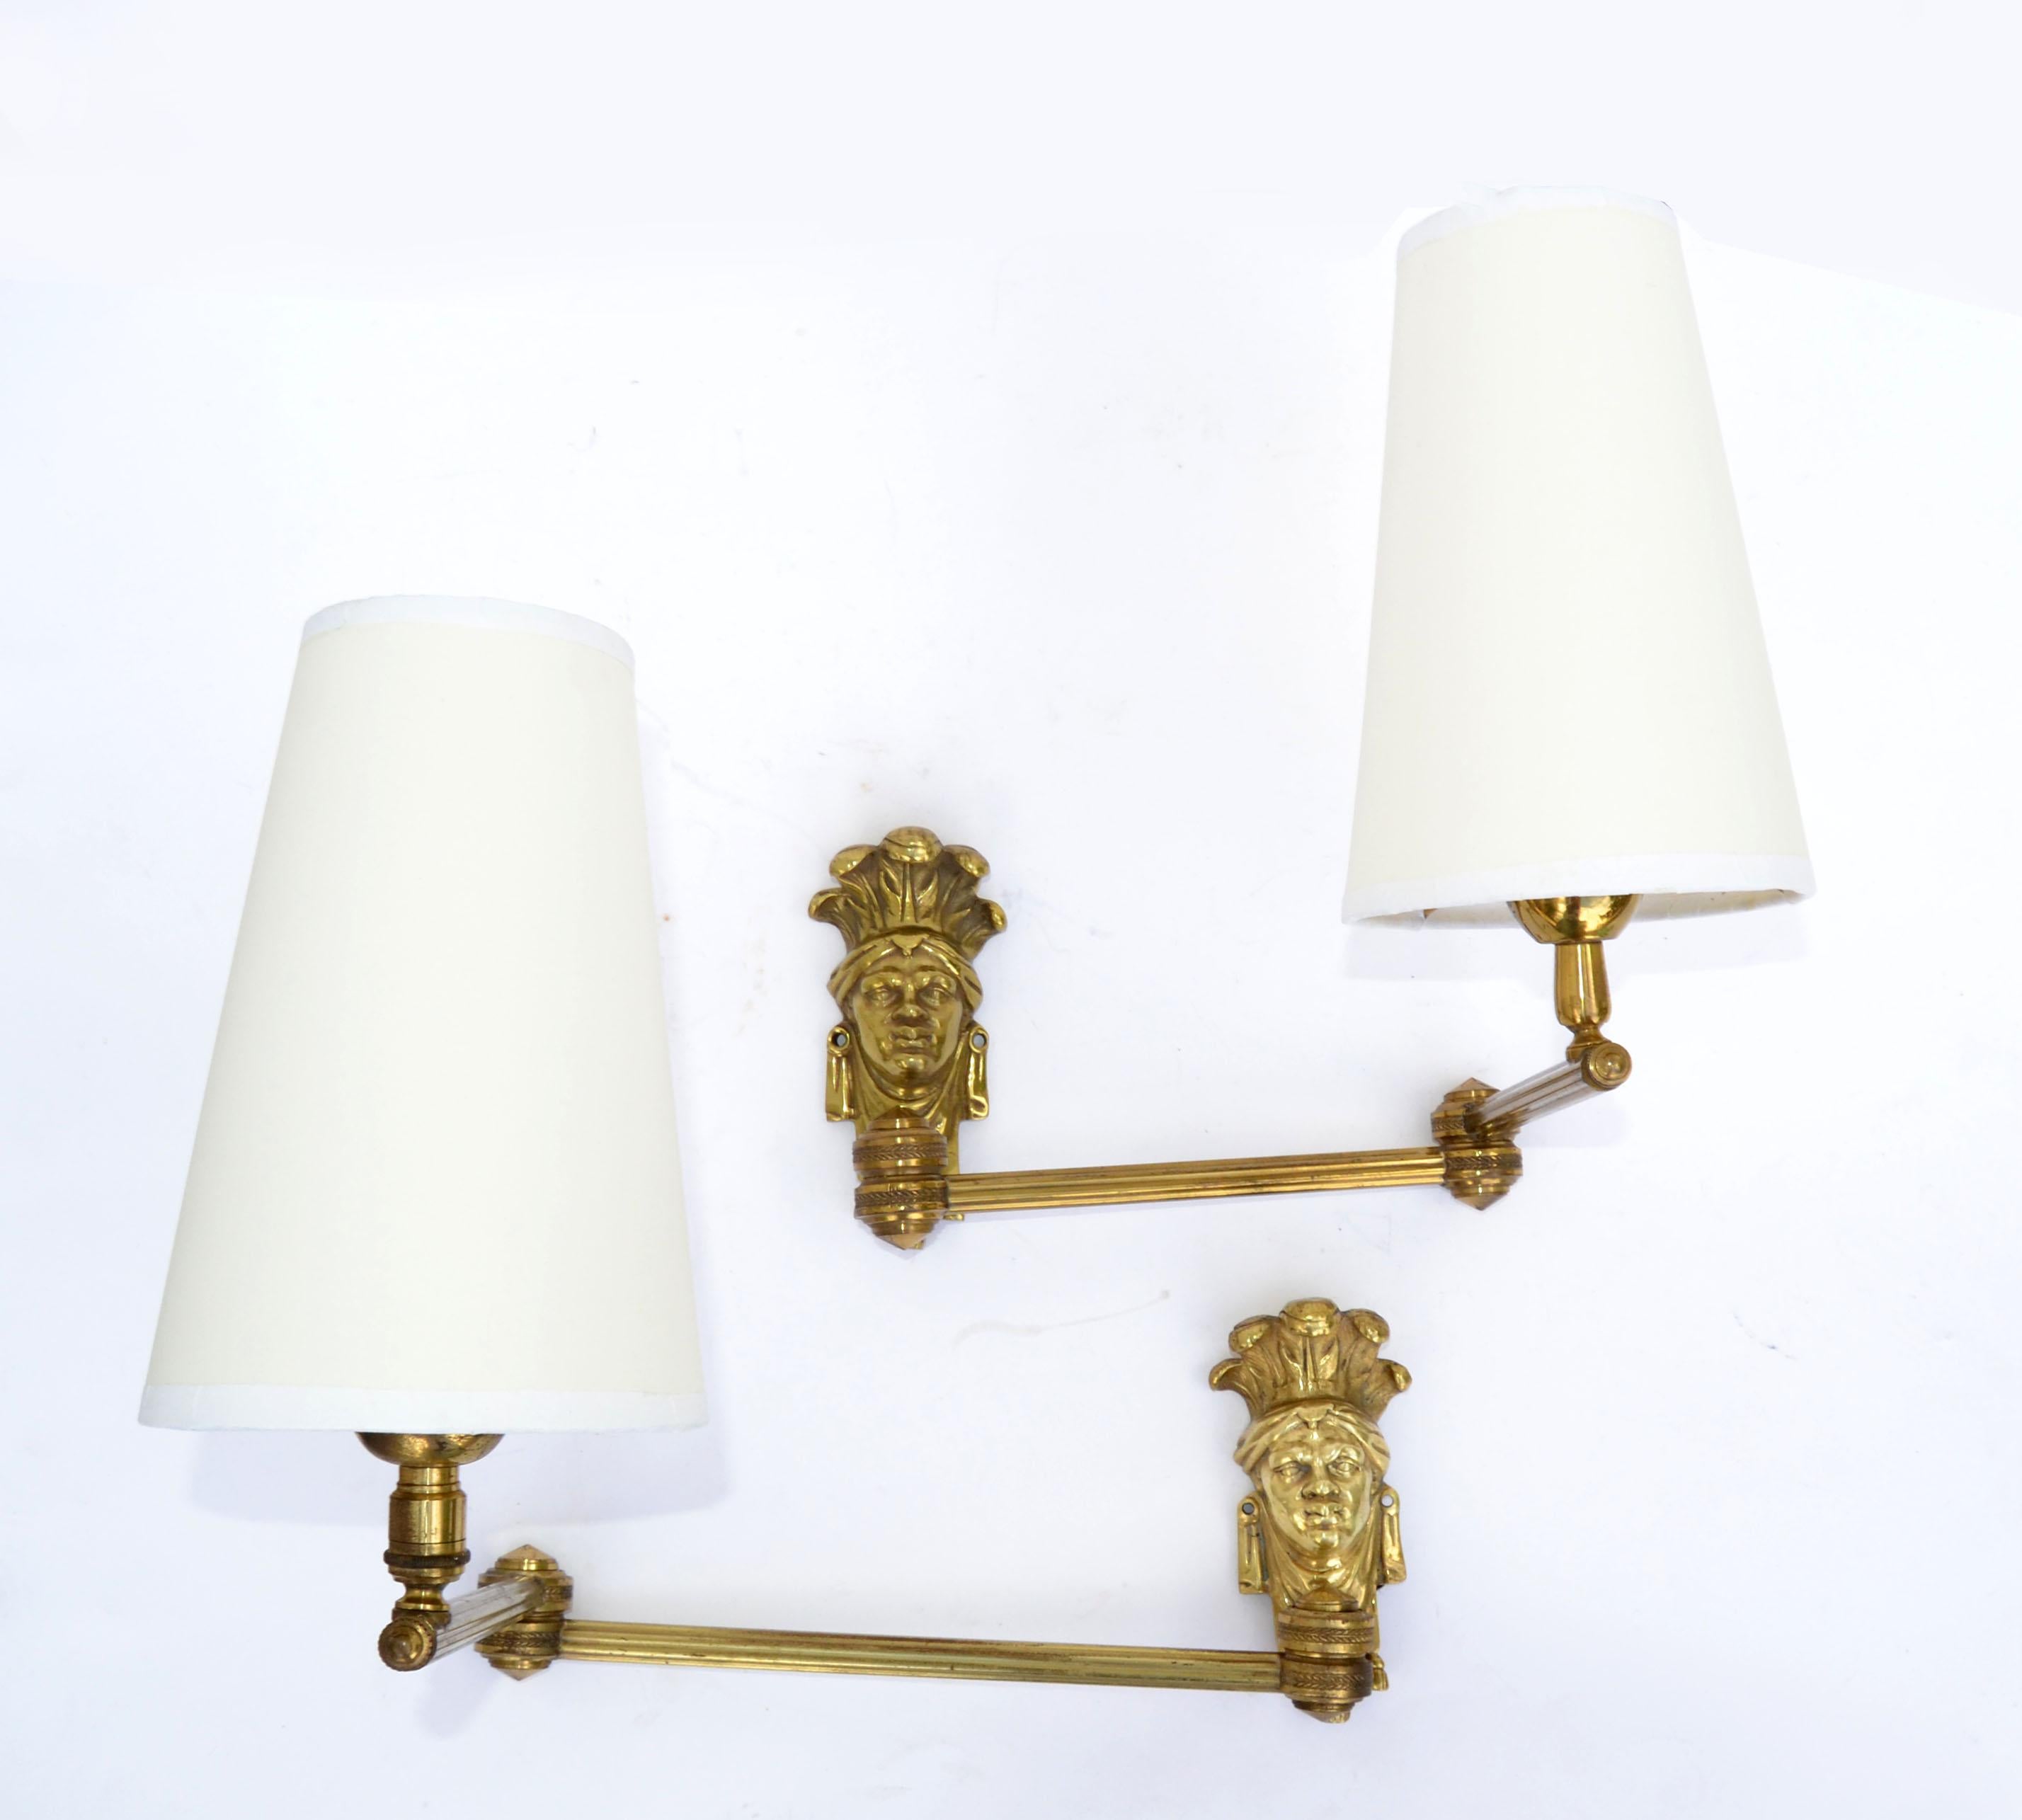 Superb set of bronze Bedouin head swing arm wall sconces.
The cone off-white shades are included.
Working condition and each takes 1 light bulb max. 60 watts.
Dimension without shade: 11 height, 5 depth, 18 inches width.
Cone Shade measure: top